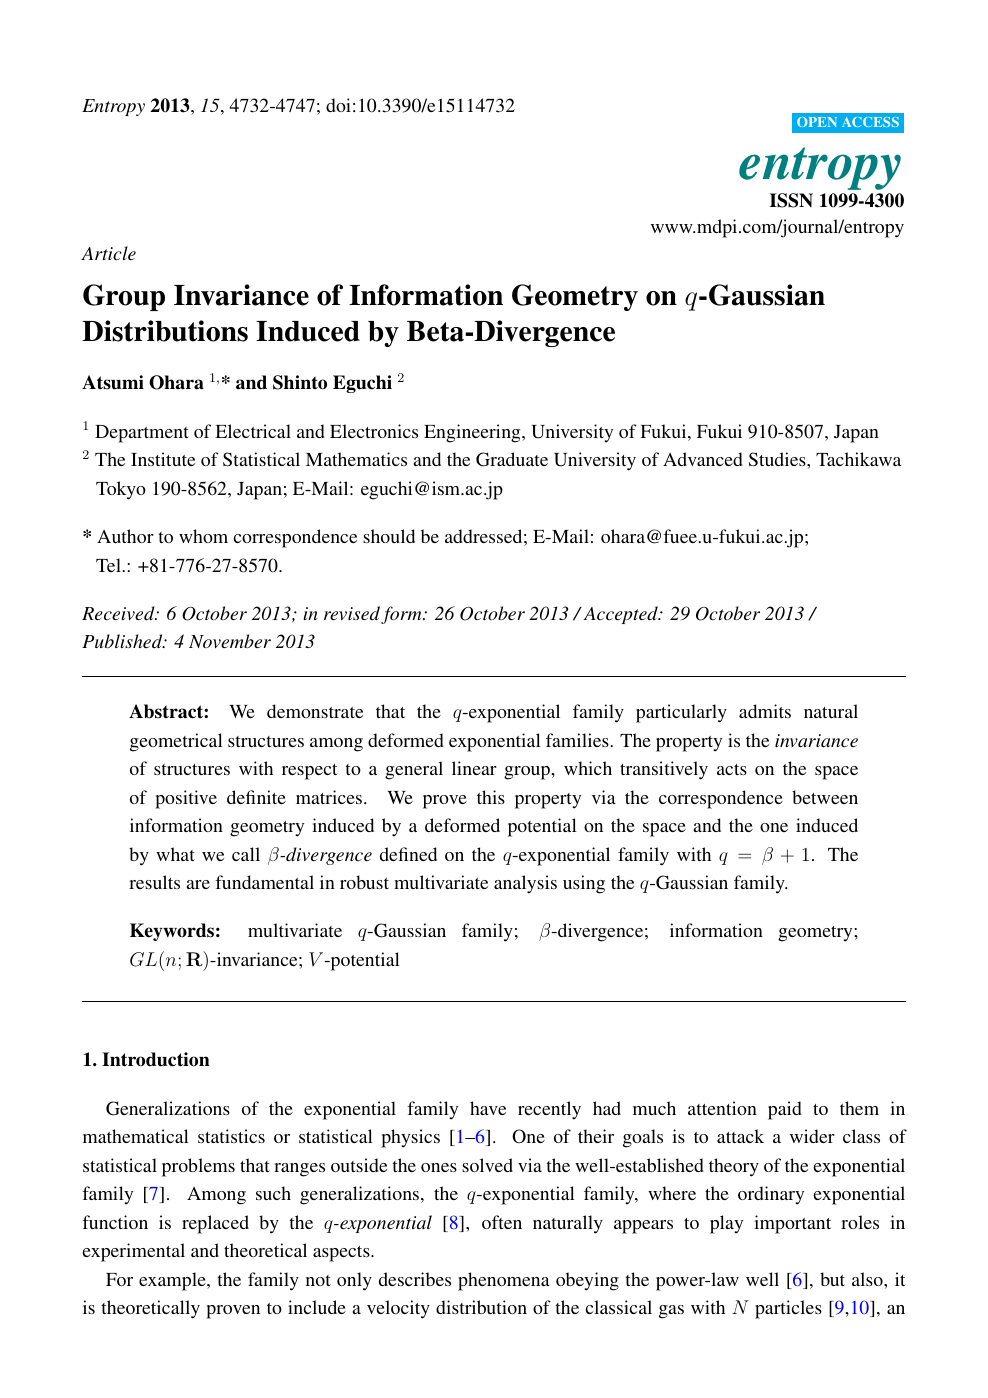 Group Invariance Of Information Geometry On Q Gaussian Distributions Induced By Beta Divergence Topic Of Research Paper In Mathematics Download Scholarly Article Pdf And Read For Free On Cyberleninka Open Science Hub